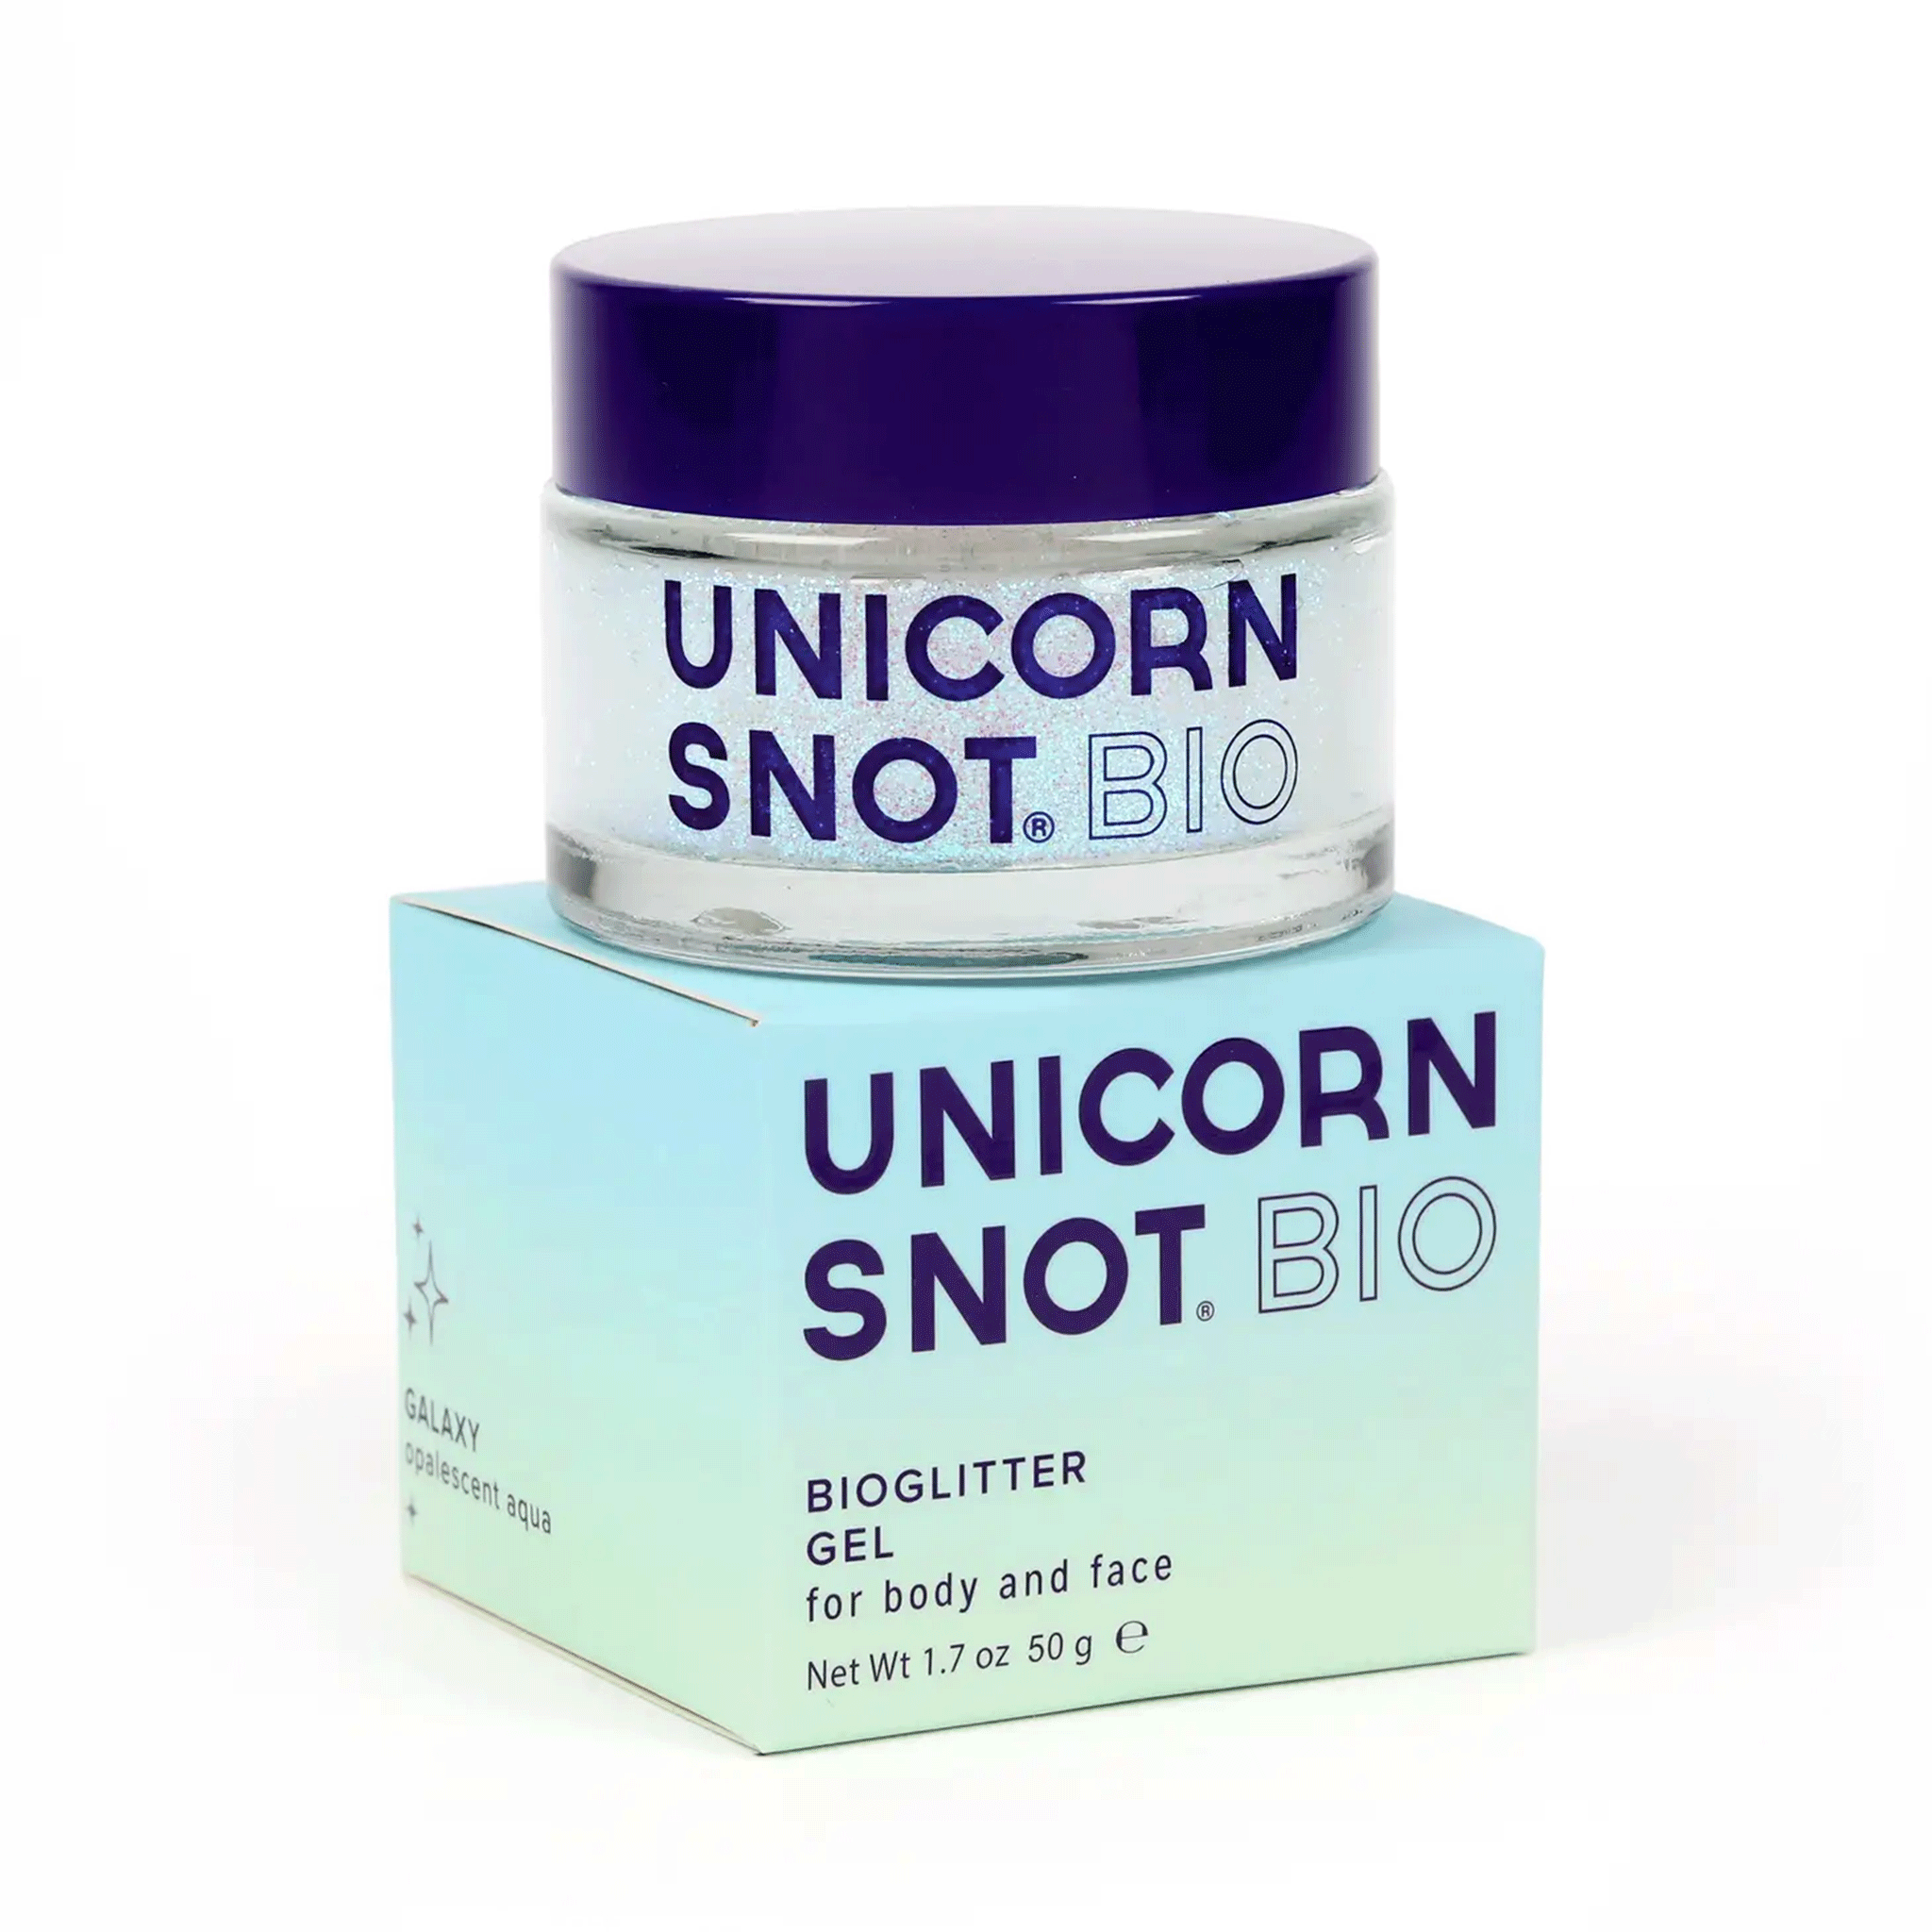 On a white background is a jar of body glitter with a blue lid and text across the front that reads, "Unicorn Snot BIO".